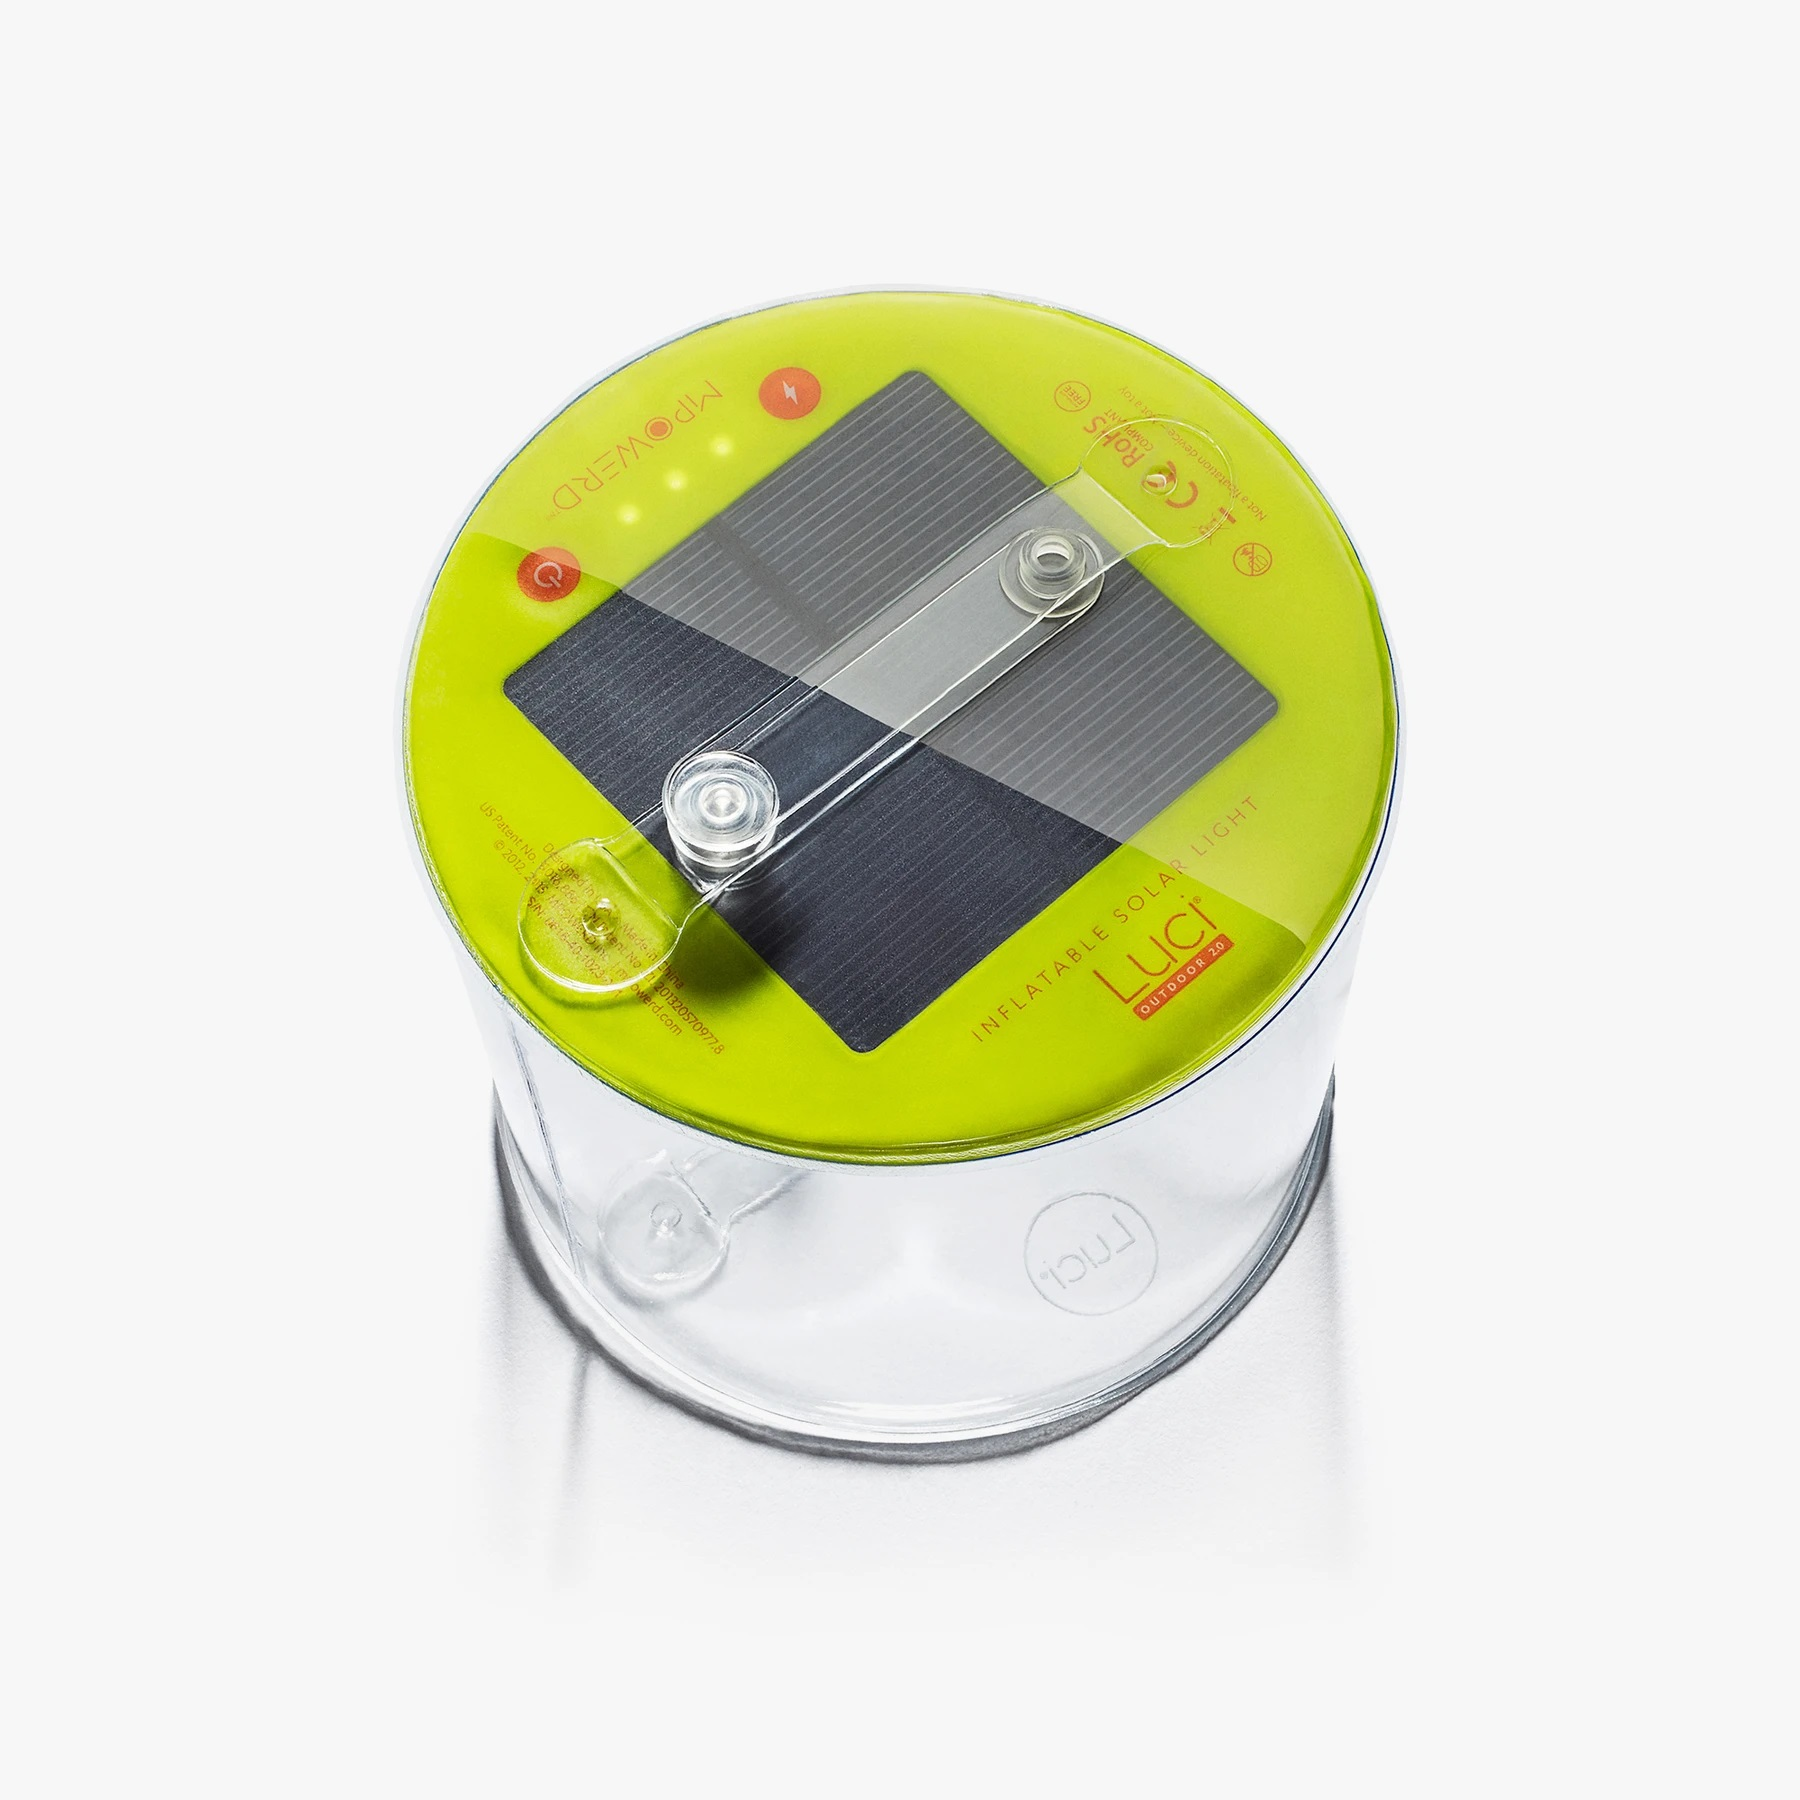 LED LUCI MPOWERED 2.0 Lampe OUTDOOR Solar